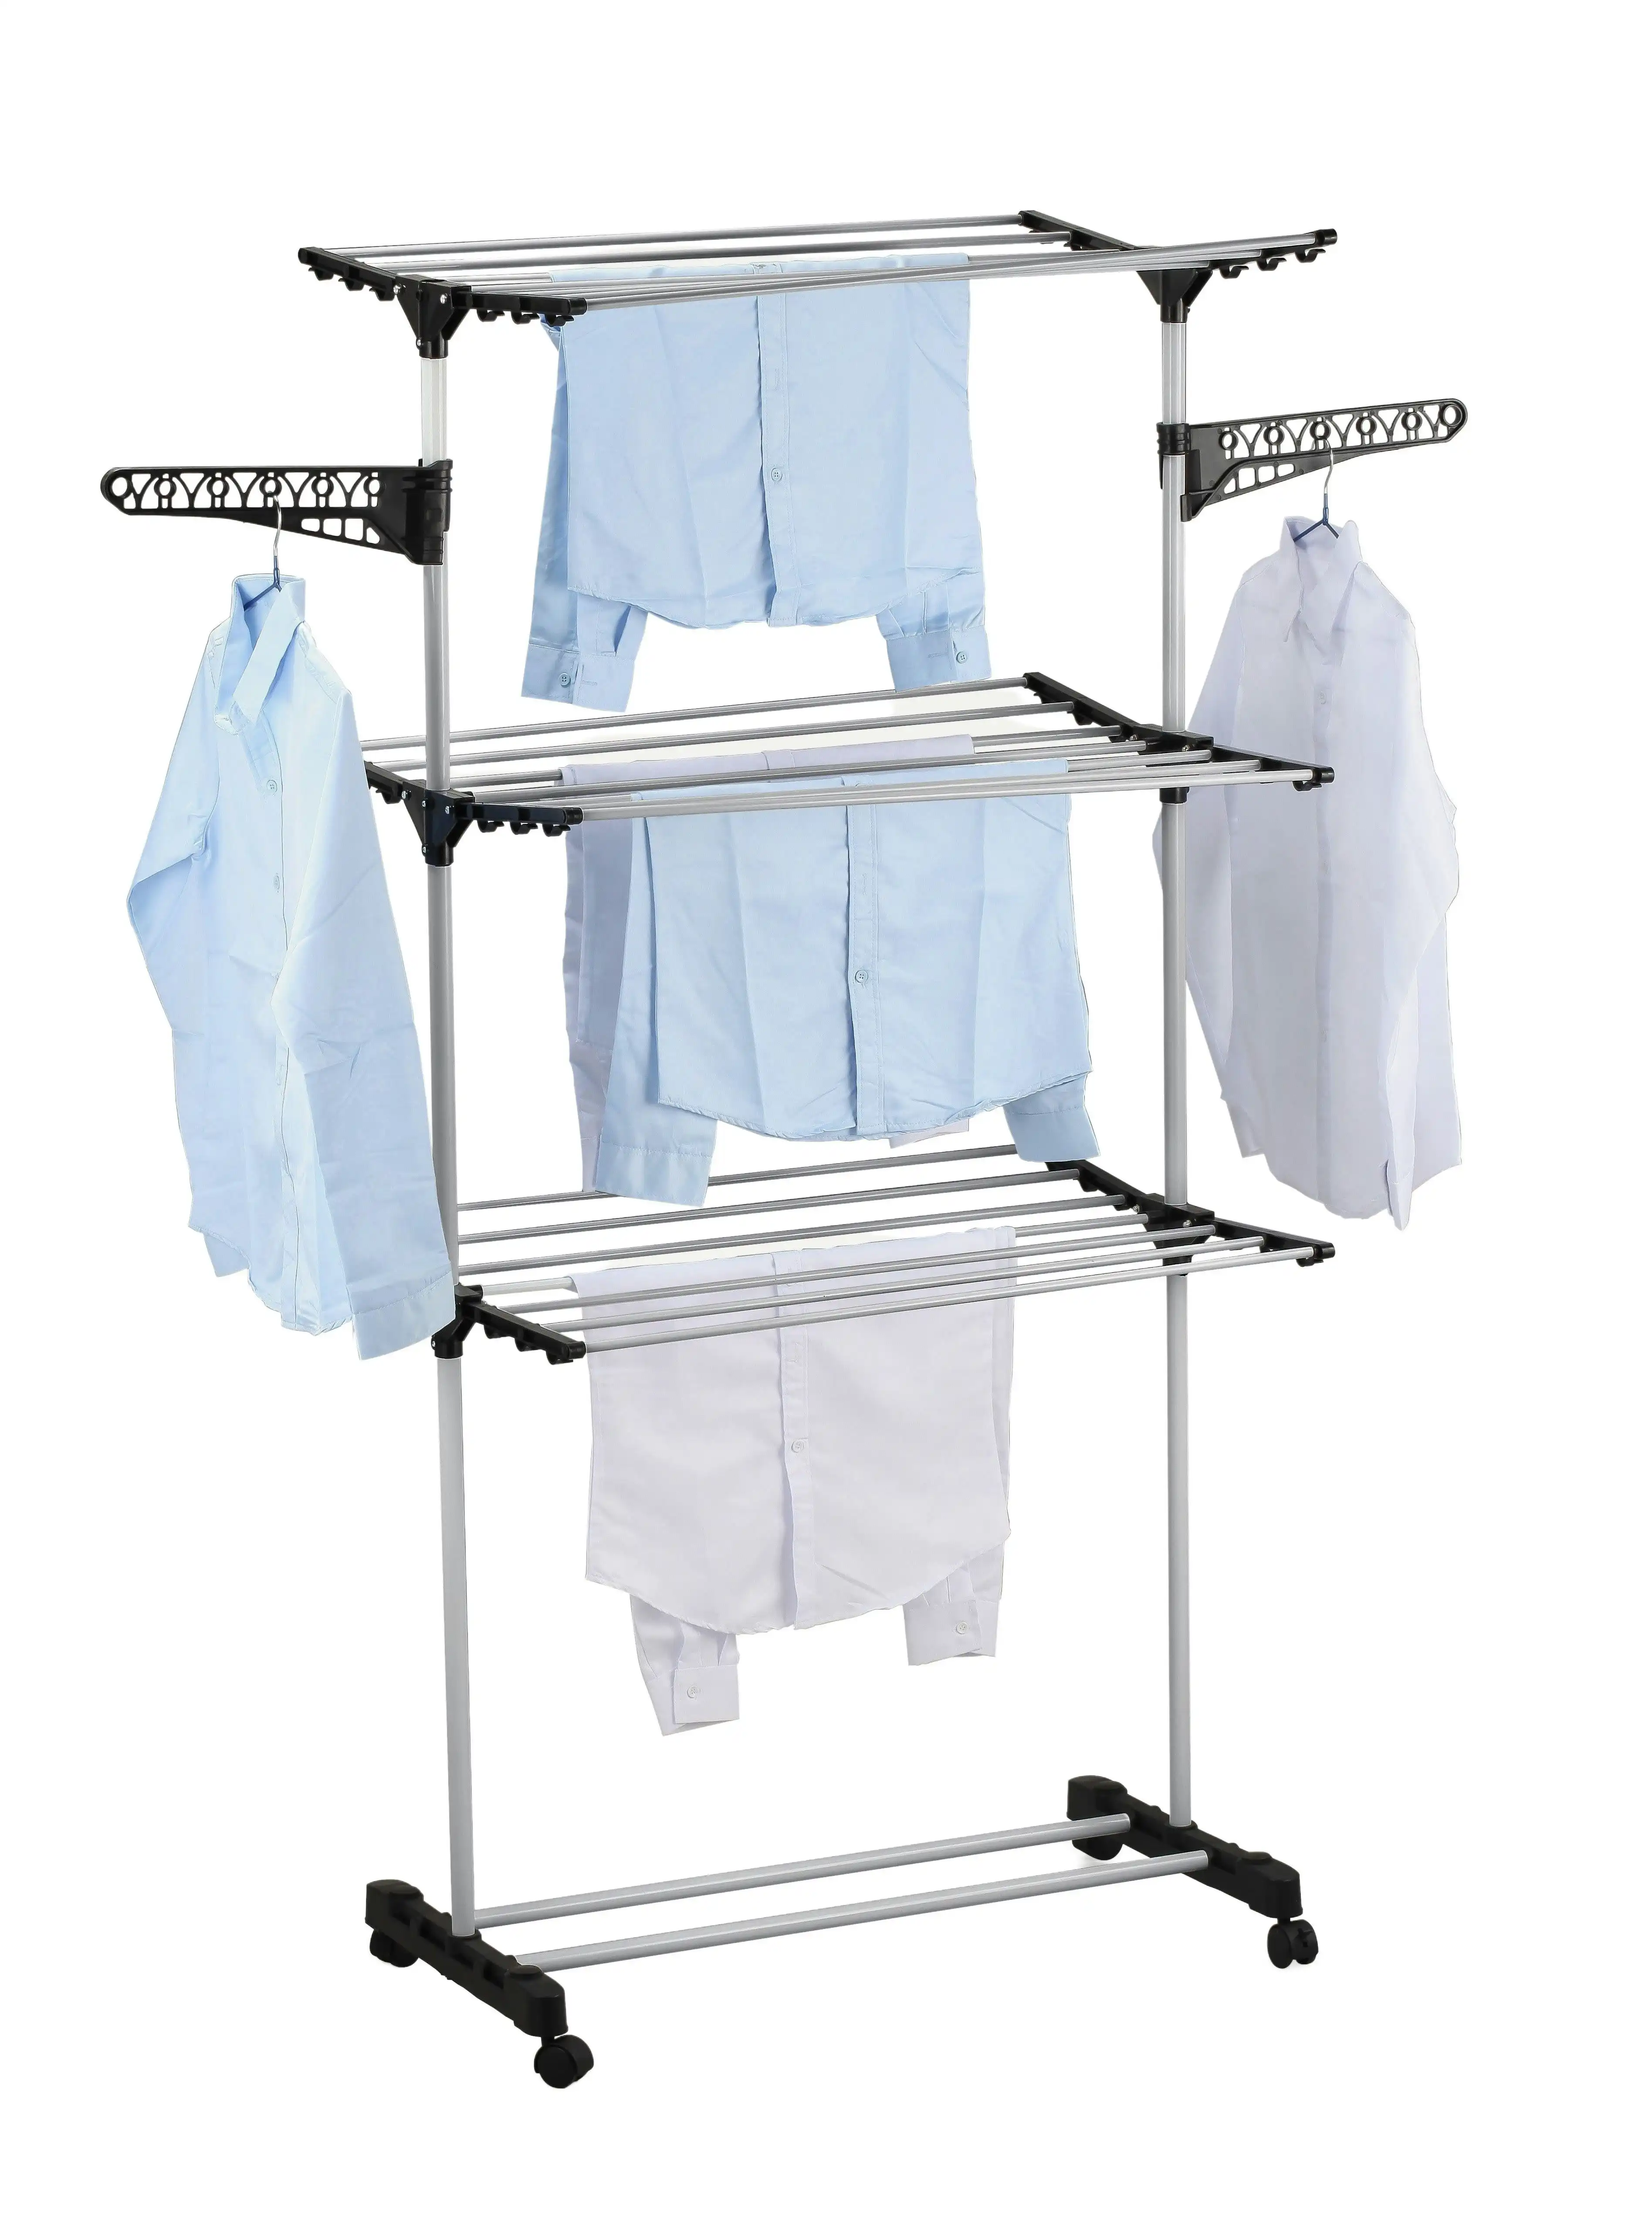 Carla Home Folding 3 Tier Clothes Laundry Drying Rack with Stainless Steel Tubes for Indoor & Outdoor Home